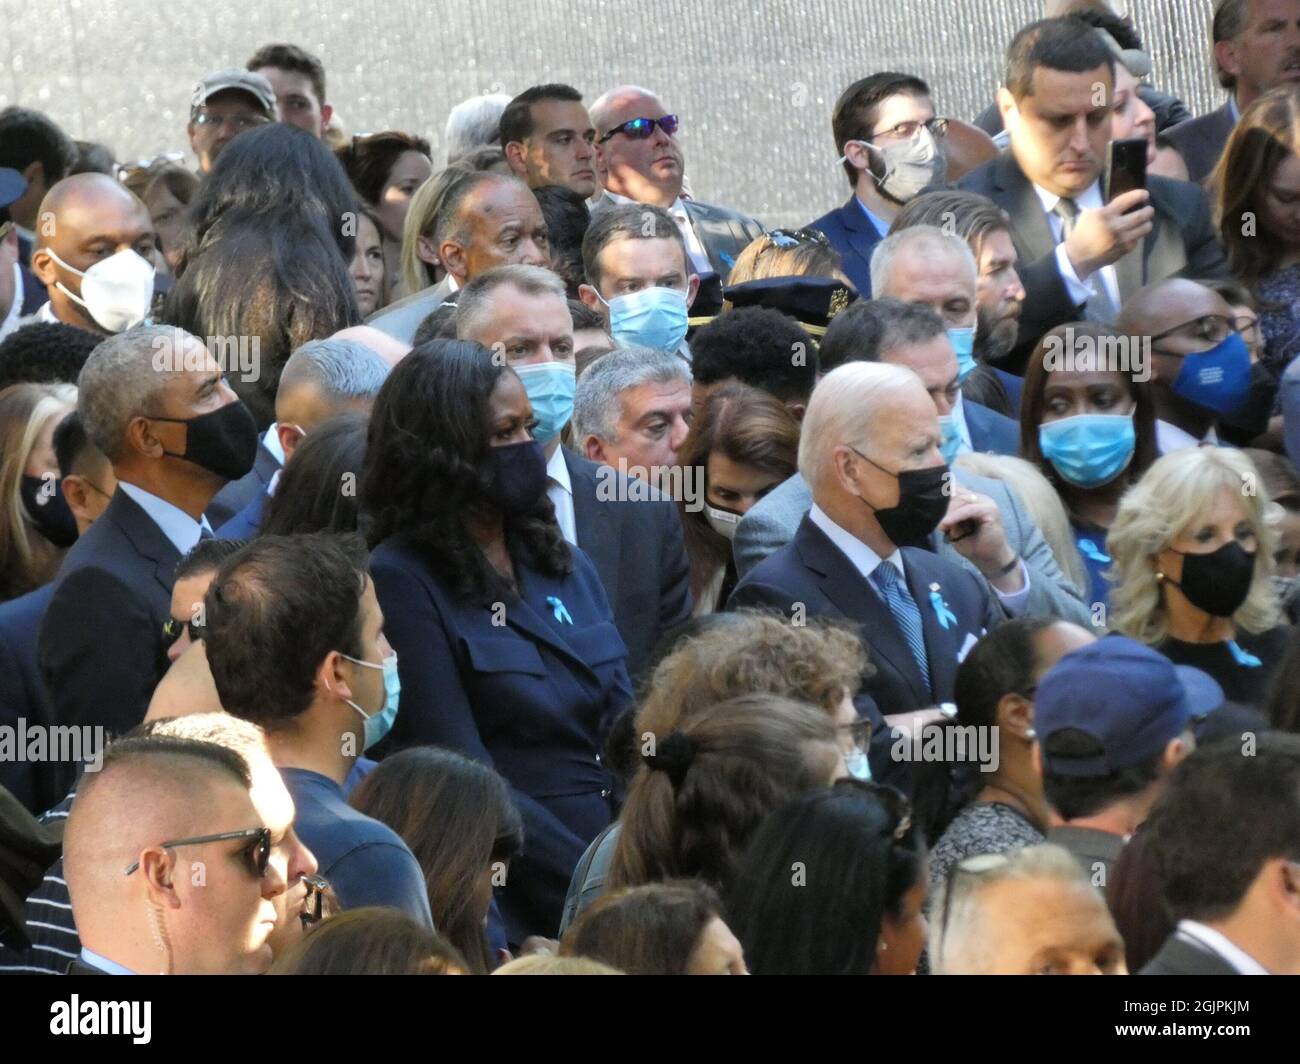 New York, USA. 11th Sep, 2021. (NEW) New York Solemnly Observes 20th Anniversary of 9/11 Terrorist Strikes. Sept 11, 2021, Ground Zero, Manhattan, NY, USA: Attended by President Joseph Biden, Former Presidents Barack Obama and Bill Clinton and their wives, US Senators Chuck Schumer and Kirstin Gillibrand, as well as NY Mayor Bill De Blasio and a retinue of Congressional Representatives, today's 20th Anniversary Ceremonies -- held at Ground Zero -- sadly and bitterly recalled the savage airborne assaults on New York's Twin Towers that claimed 3,000 lives, and which forever-blunted America's Stock Photo